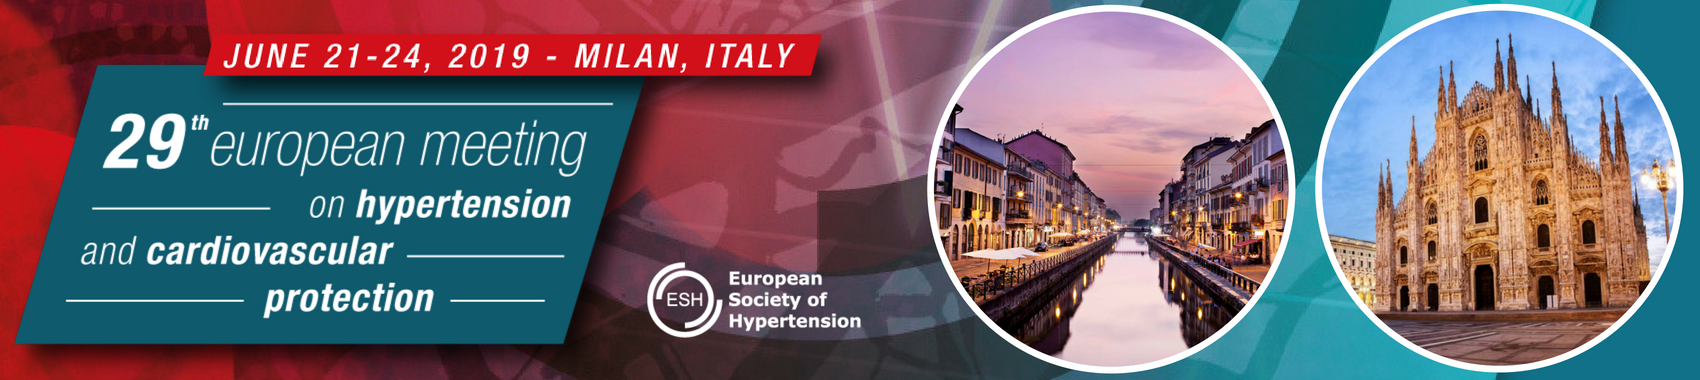 29th european meeting on hypertension and cardiovascular protection